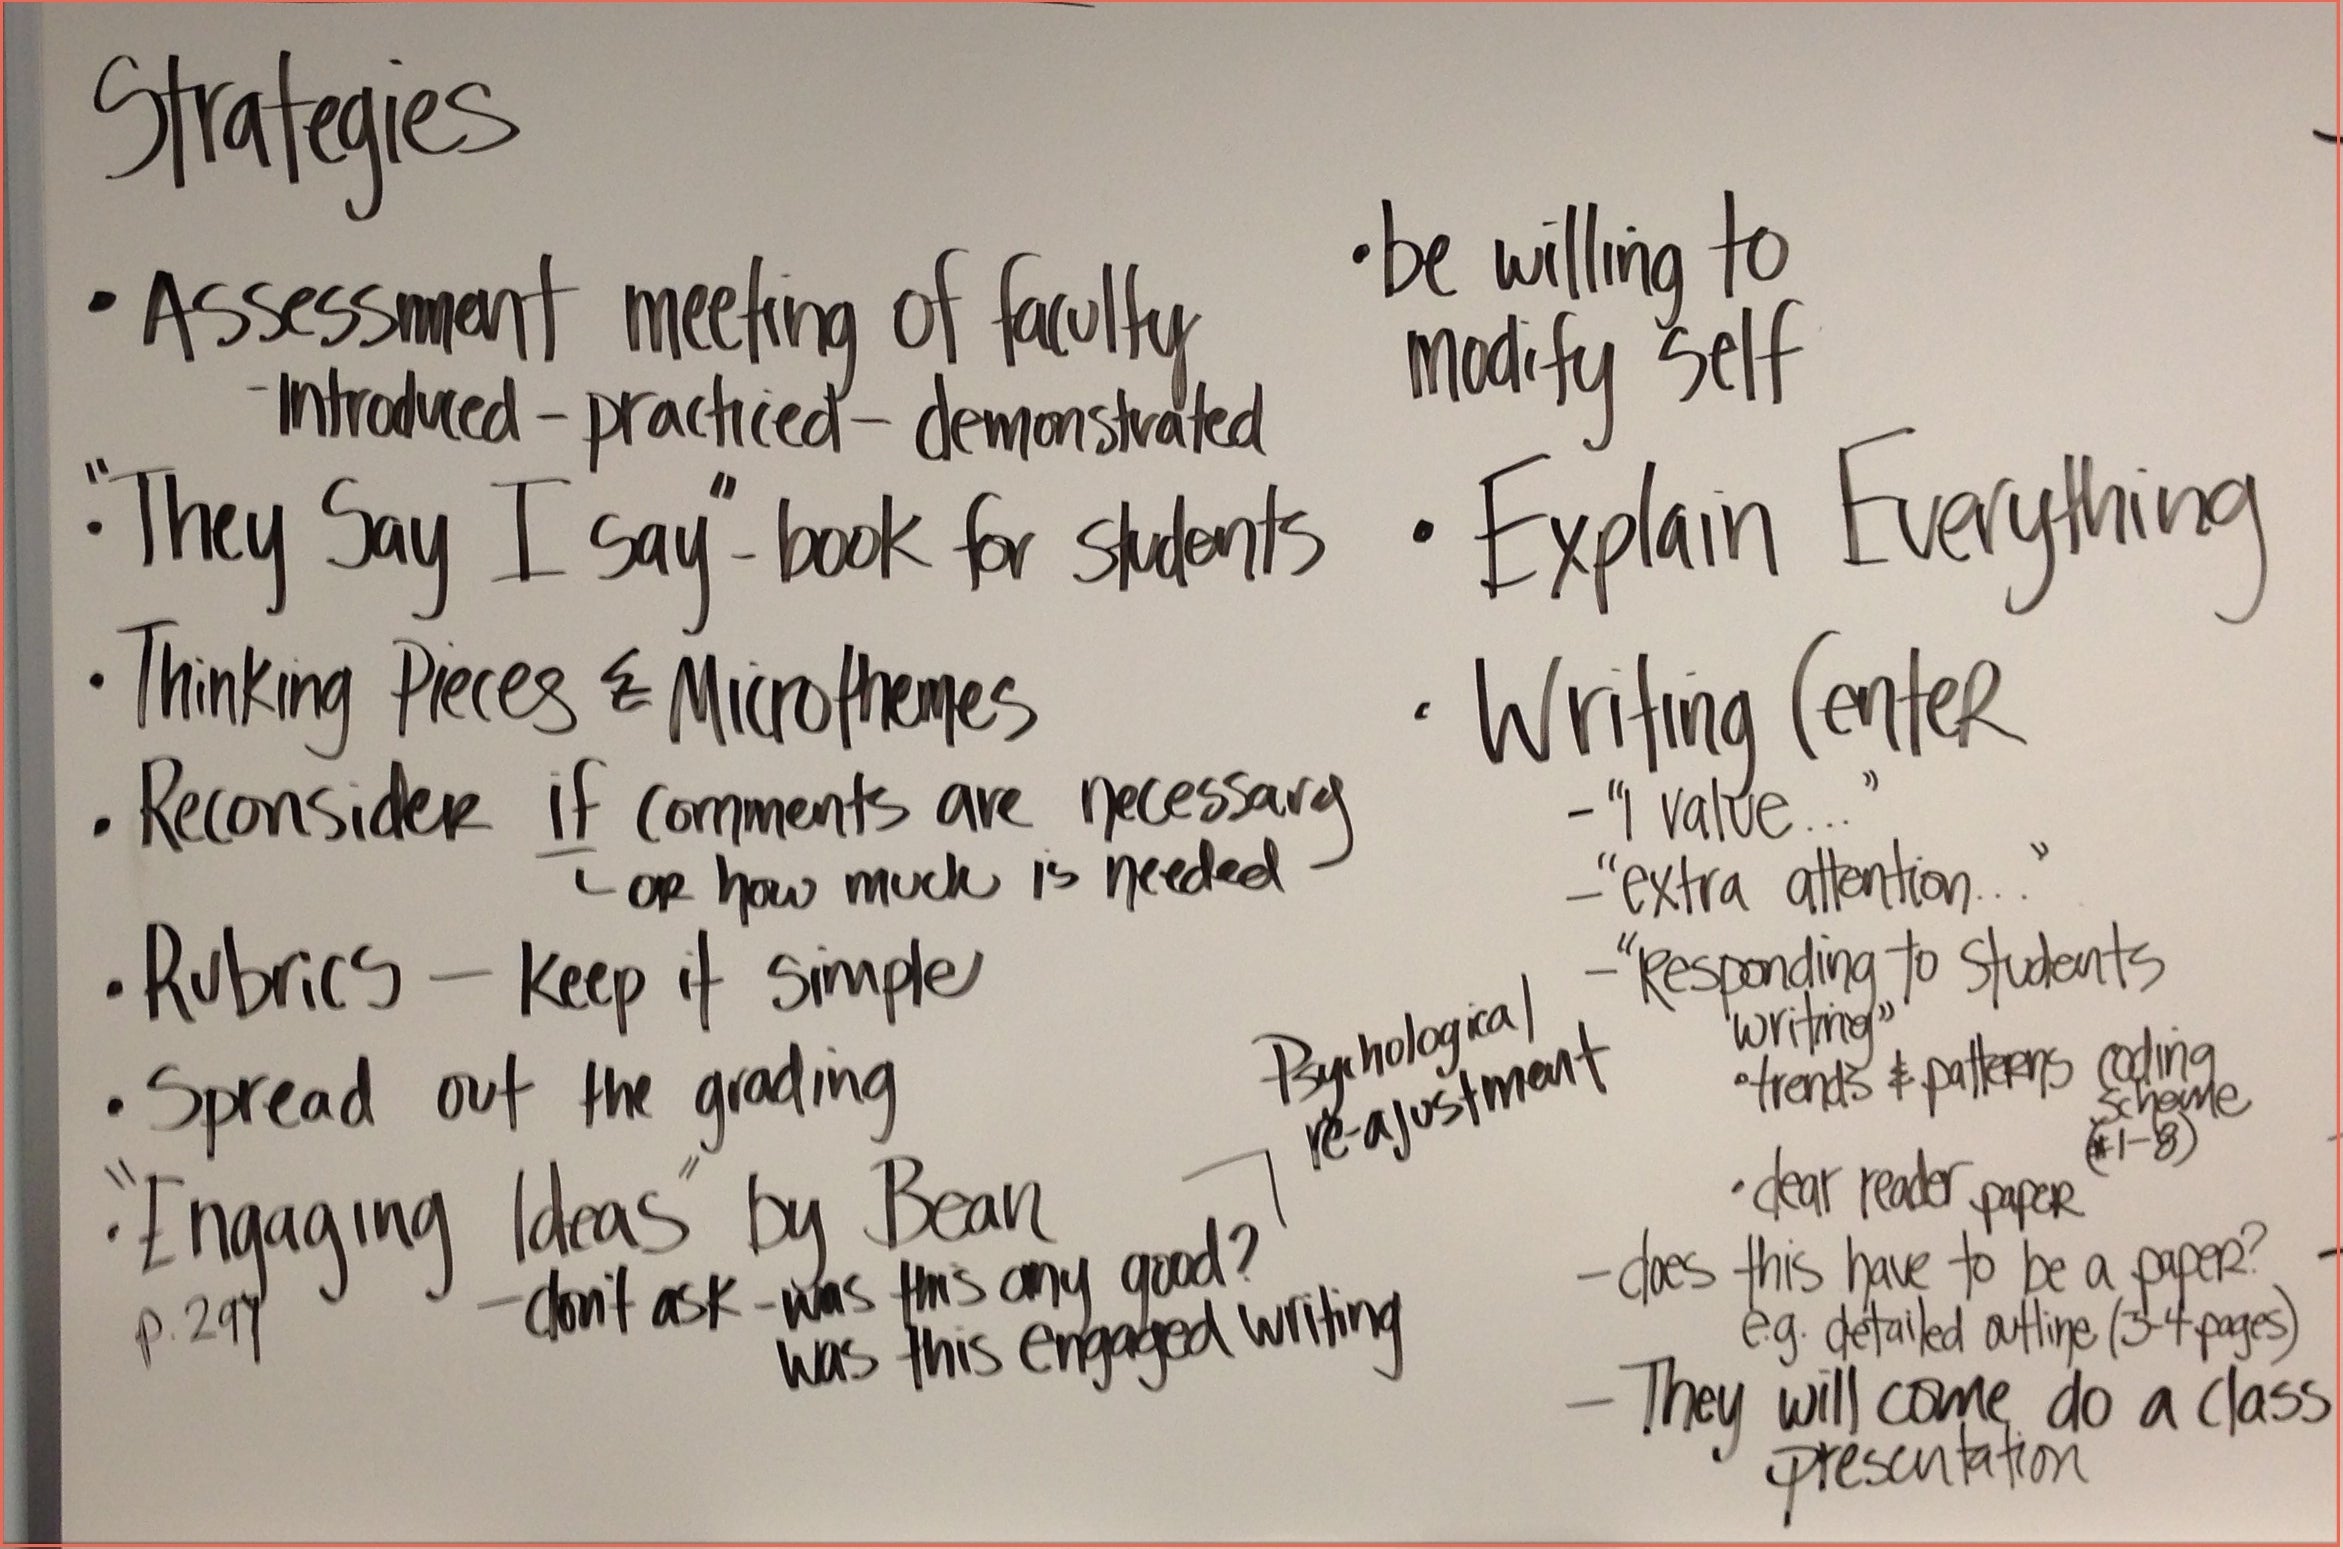 Strategies for writing in large classes